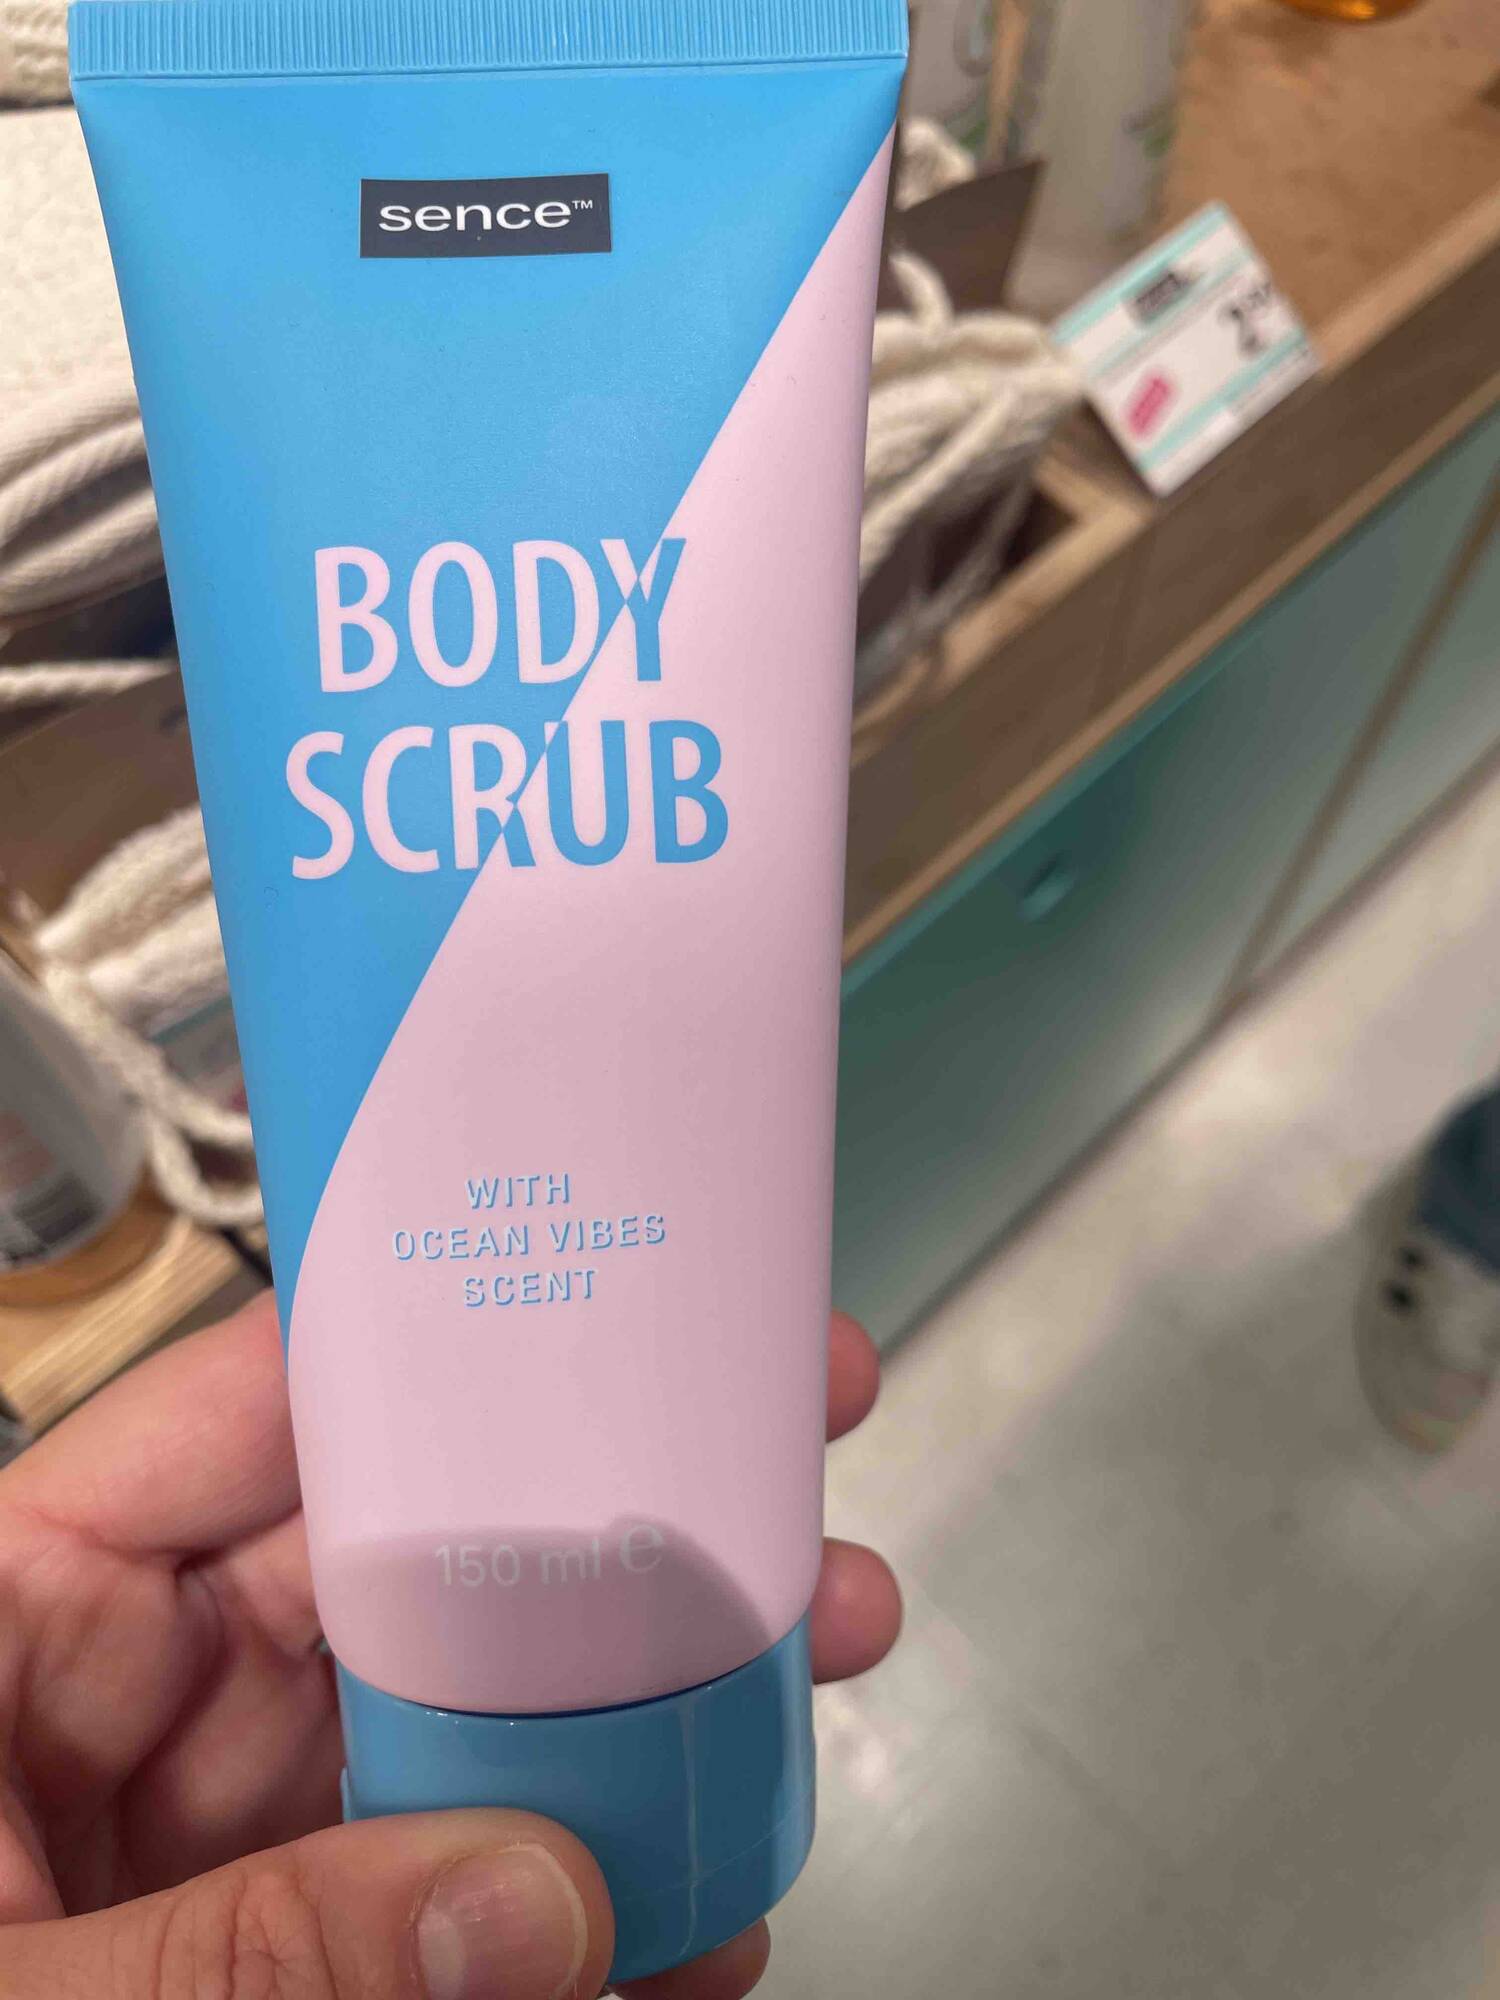 SENCE - Body scrub with ocean vibes scent